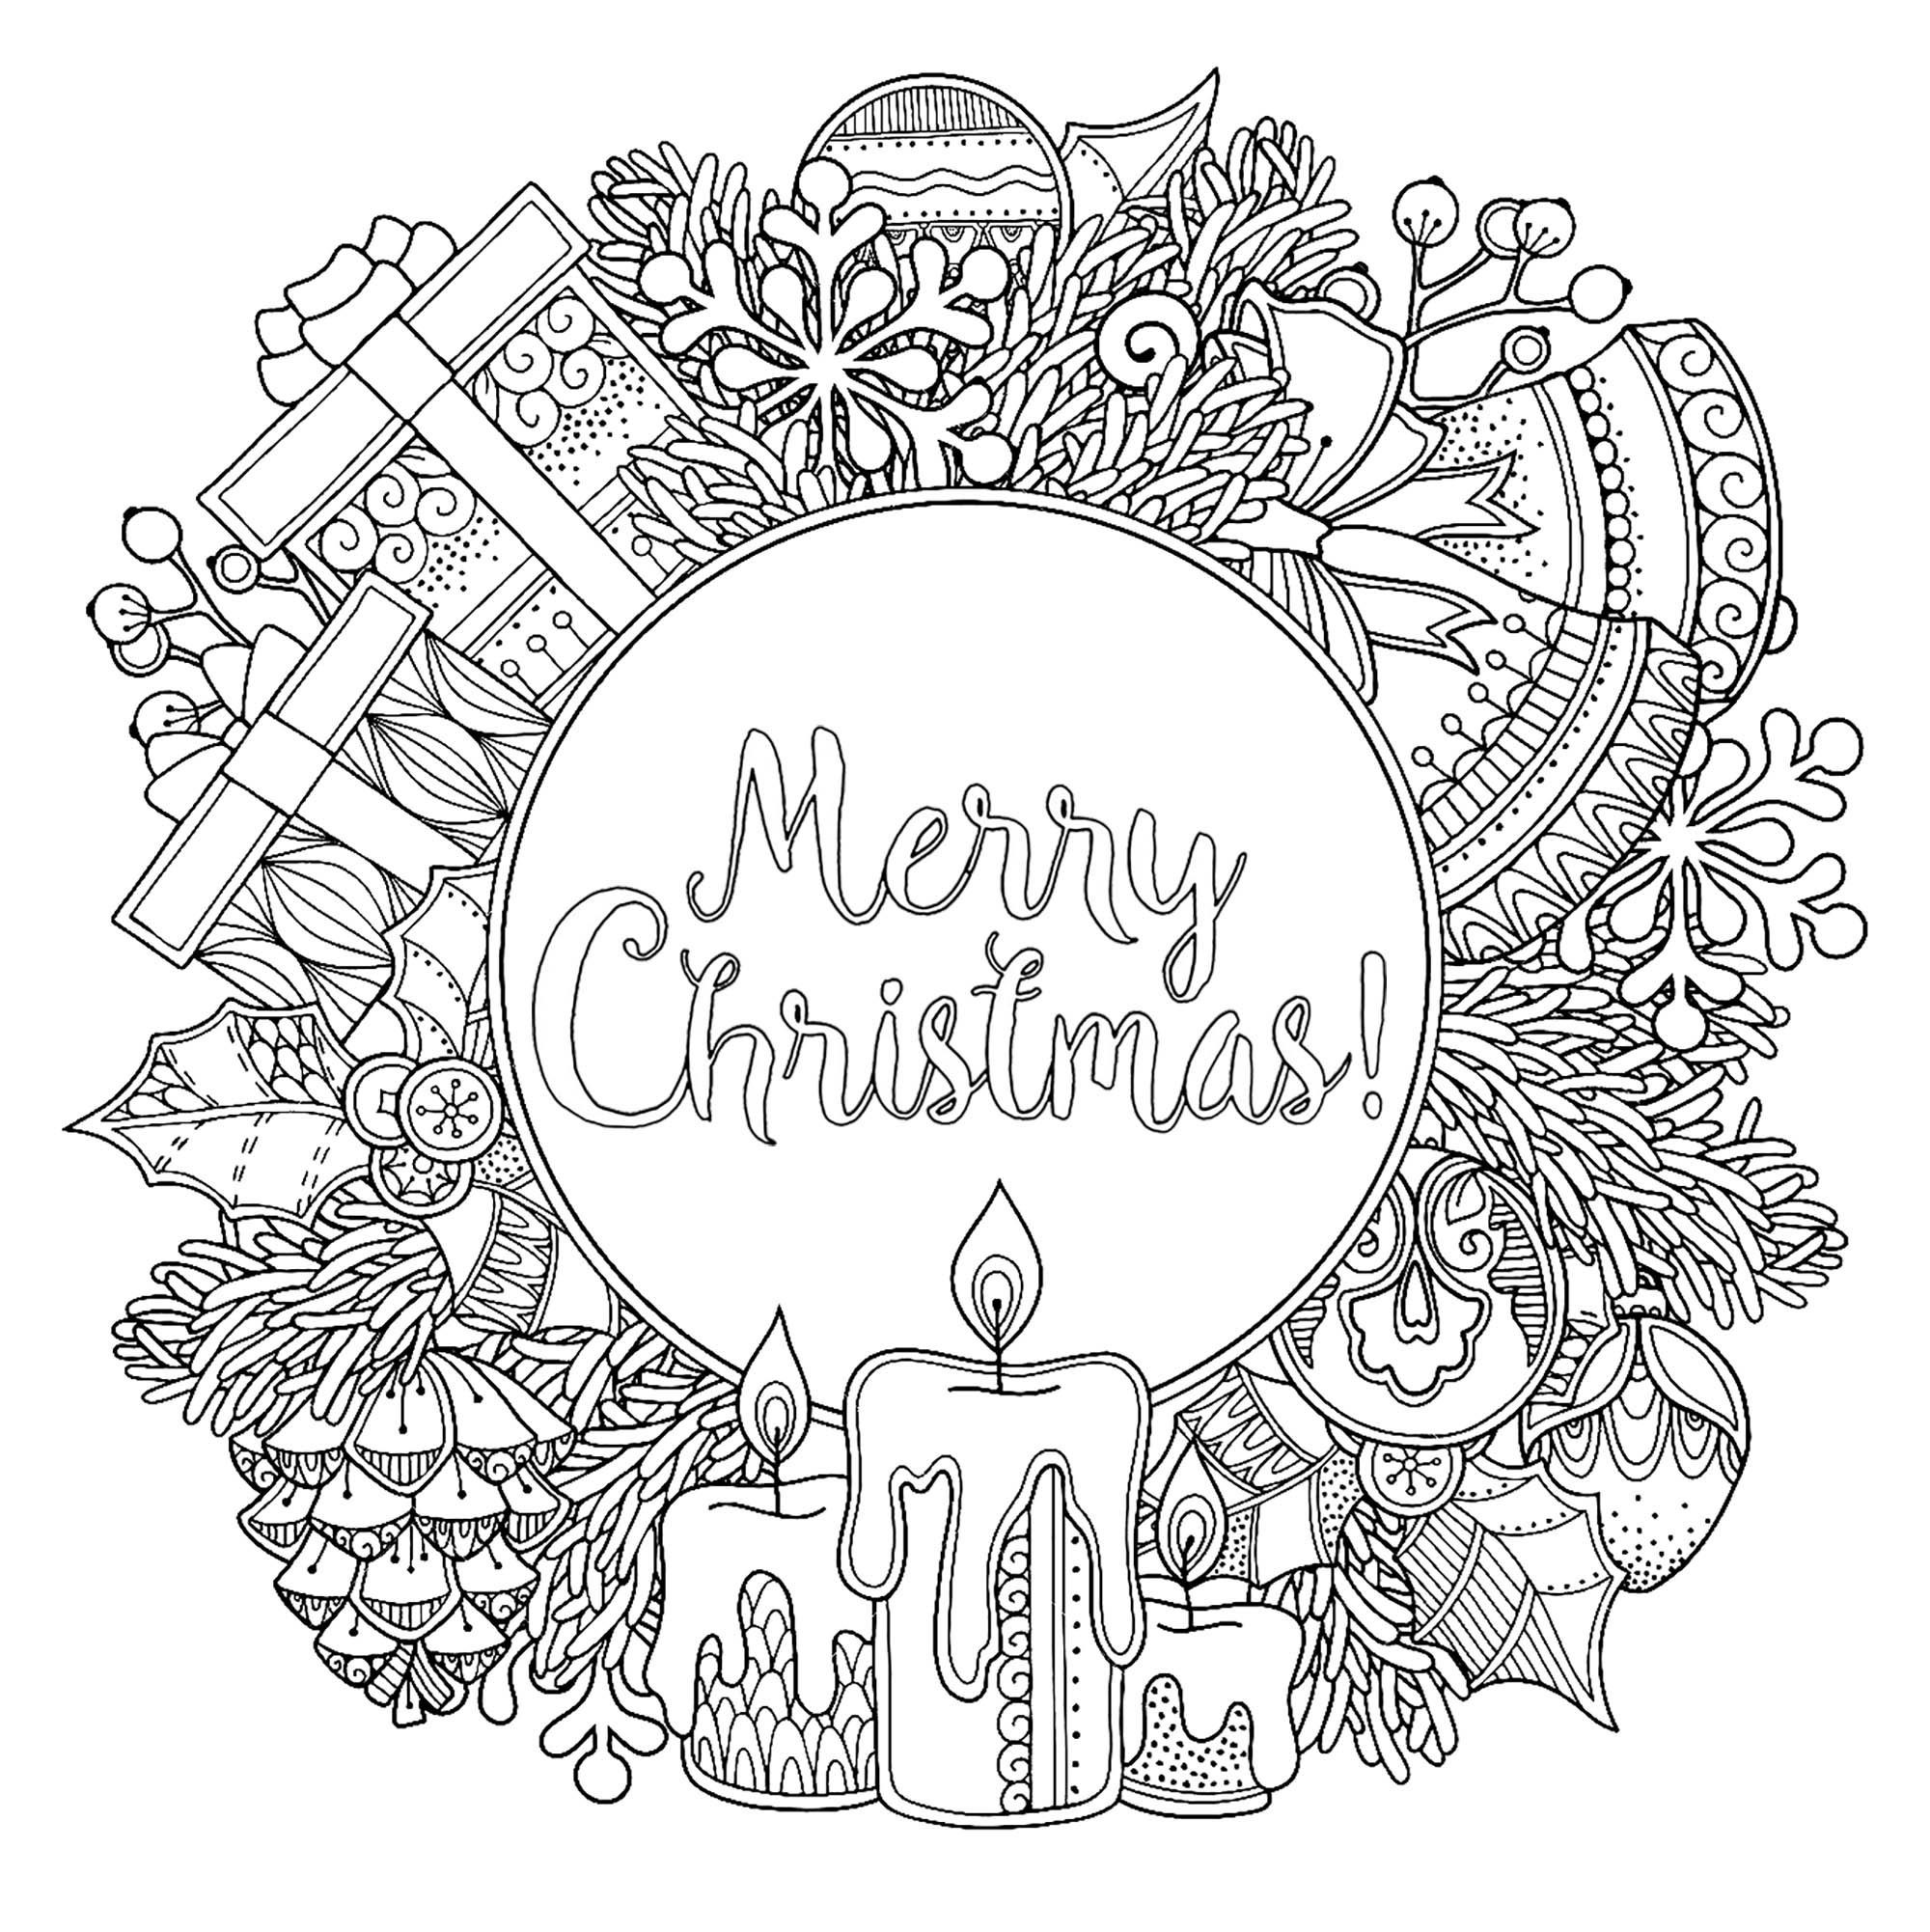 coloring pages : Coloring Pages For Adults Pdf Free Download Fresh Doodl  Christmas Wreath Christmas Coloring Pages For Adults Coloring Pages for  Adults Pdf Free Download ~ affiliateprogrambook.com